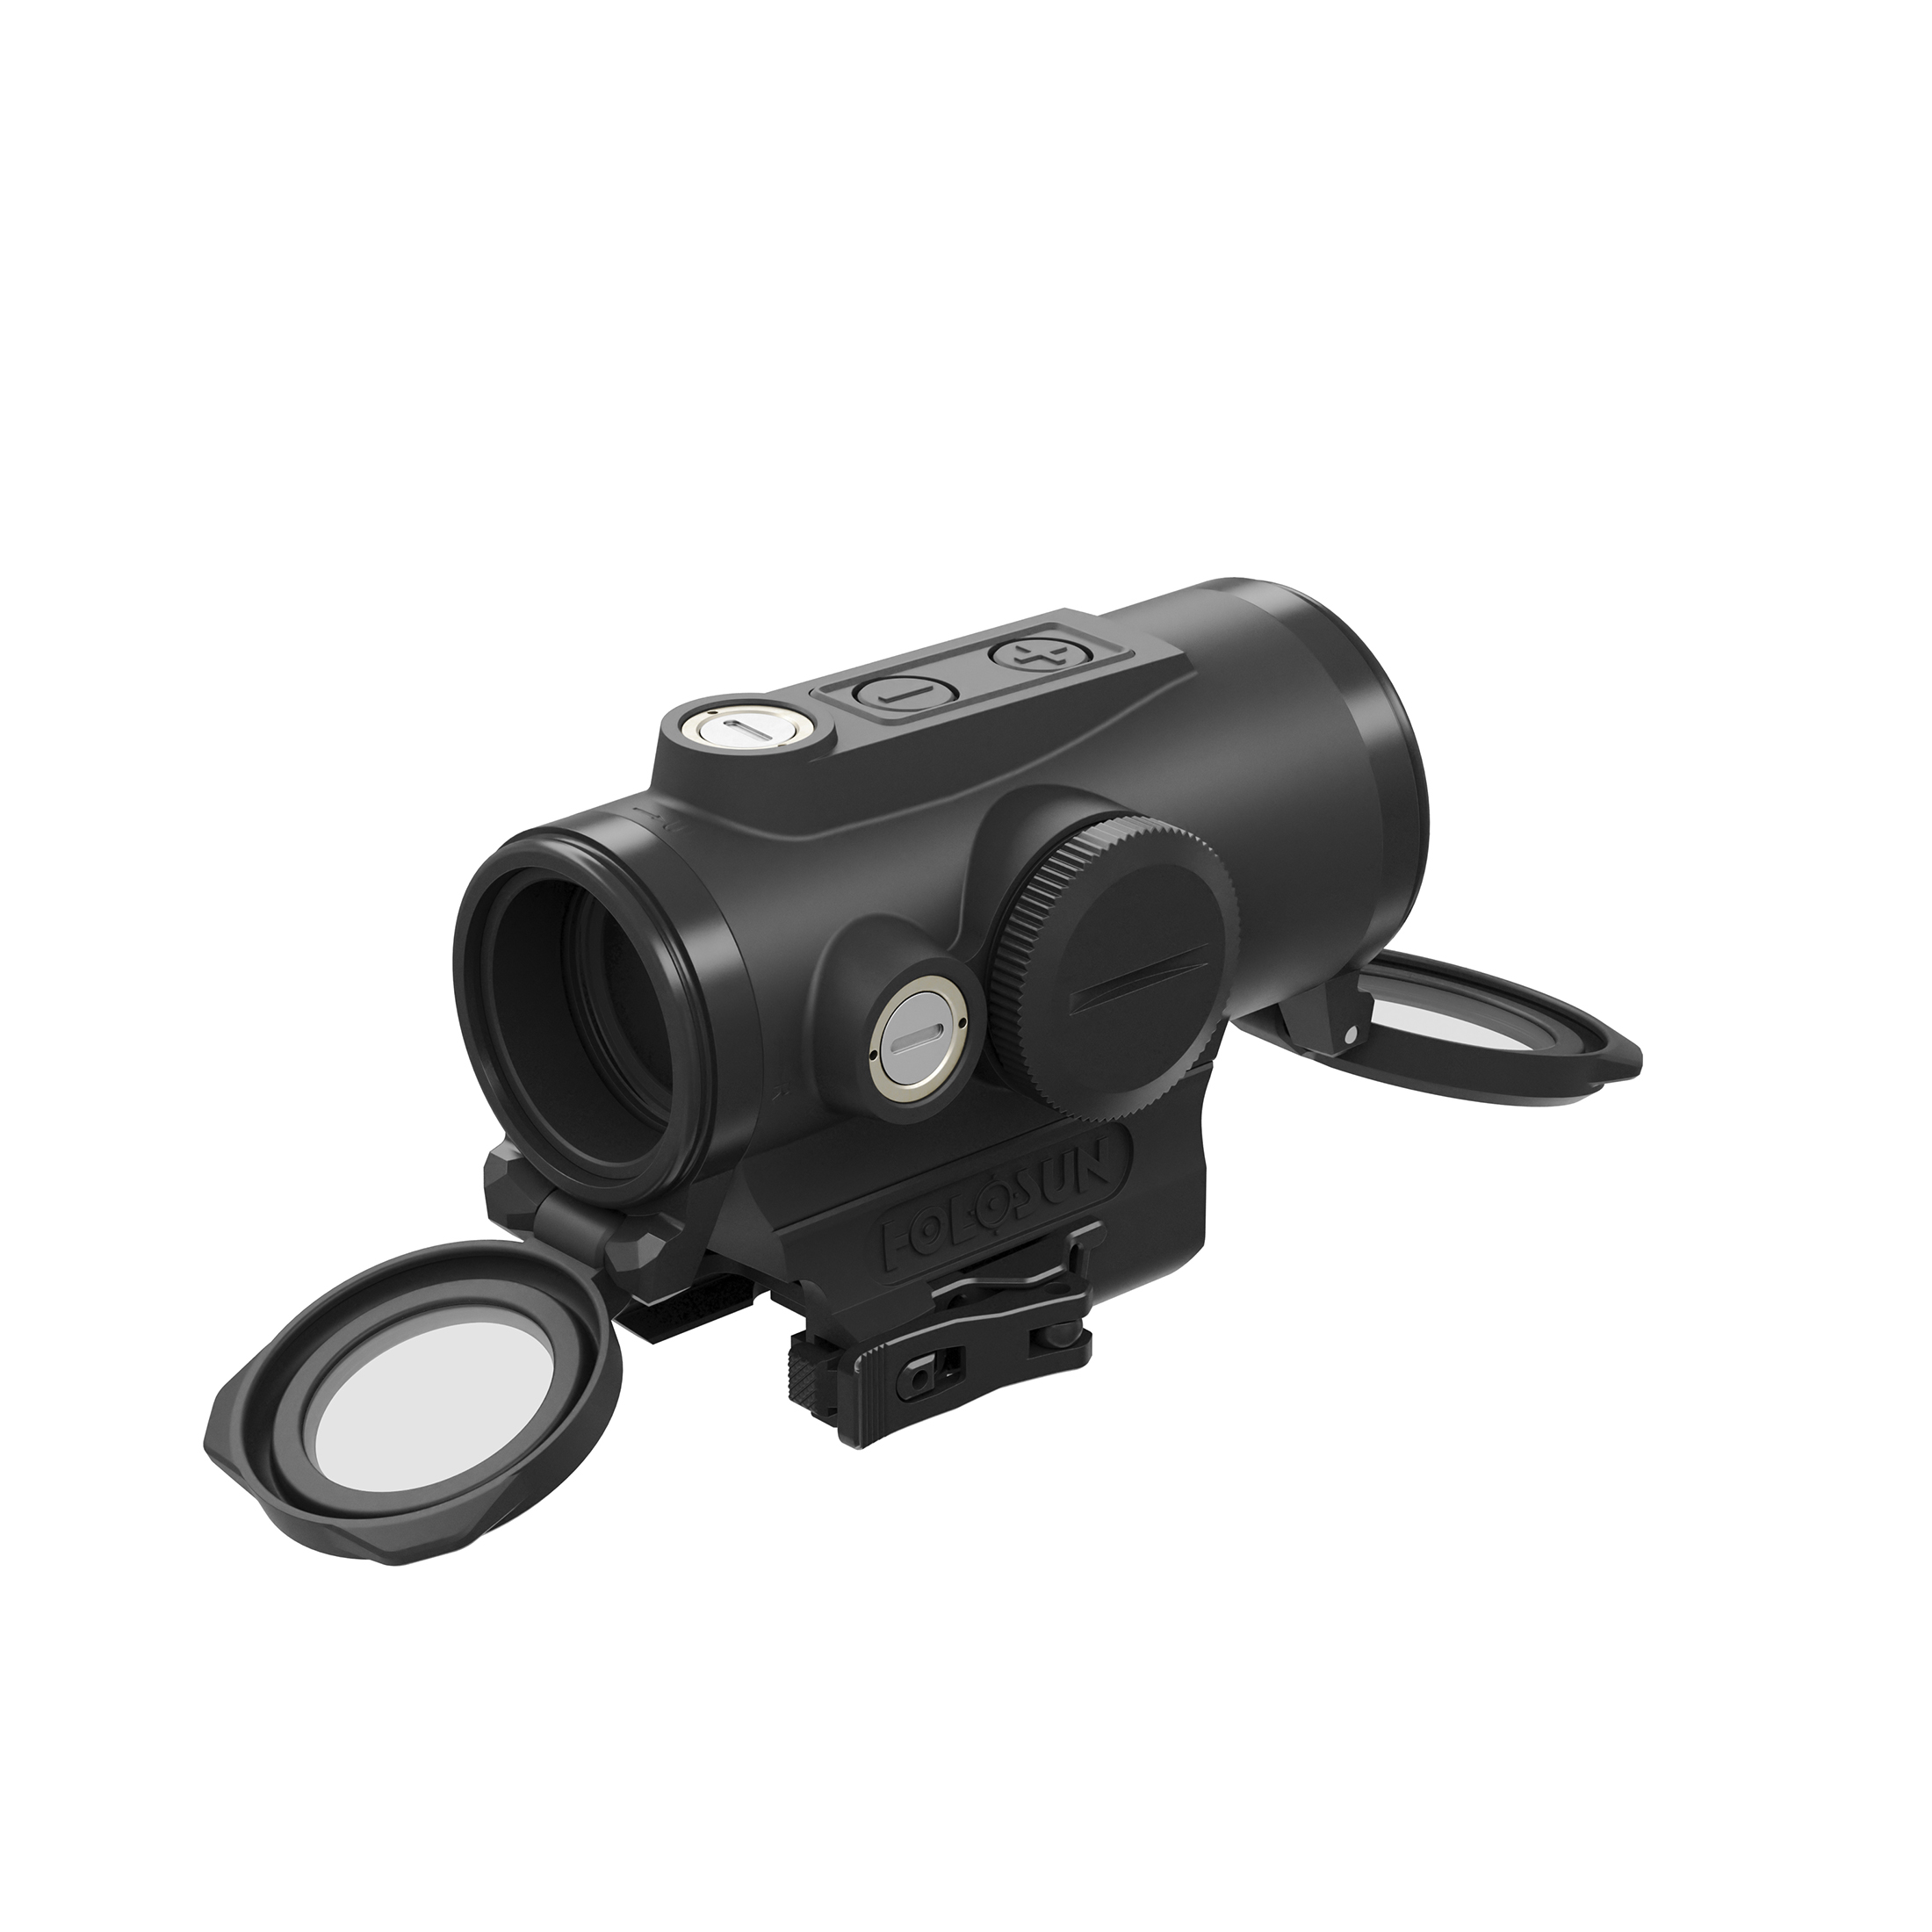 Holosun Green Dot Sight HE530G-GR switchable between Circle Dot and Single Dot and a full titanium …